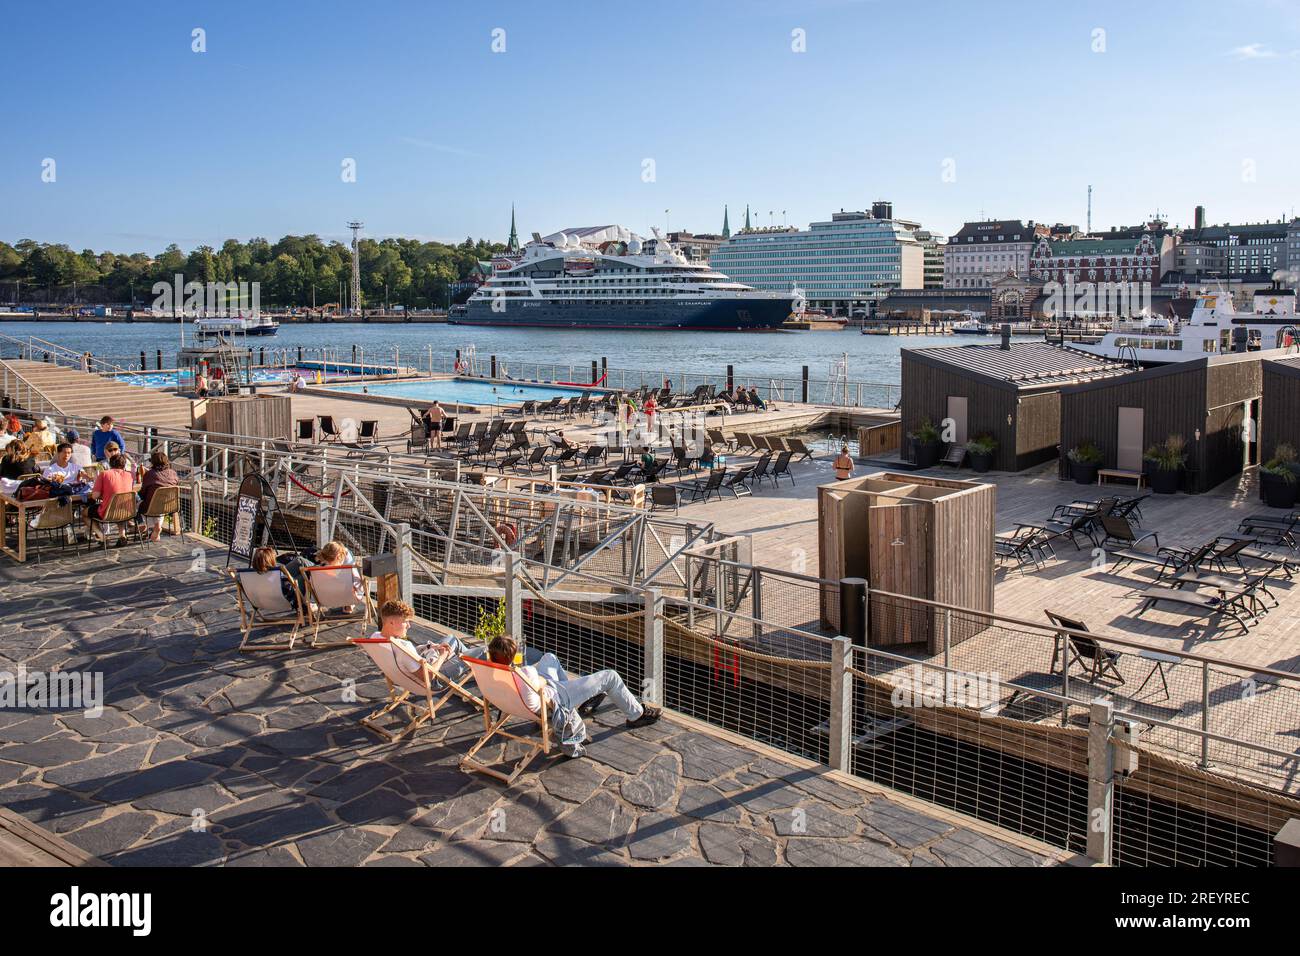 Allas Sea Pool outdoor spa on a floating deck in evening sunshine. Helsinki, Finland. Stock Photo